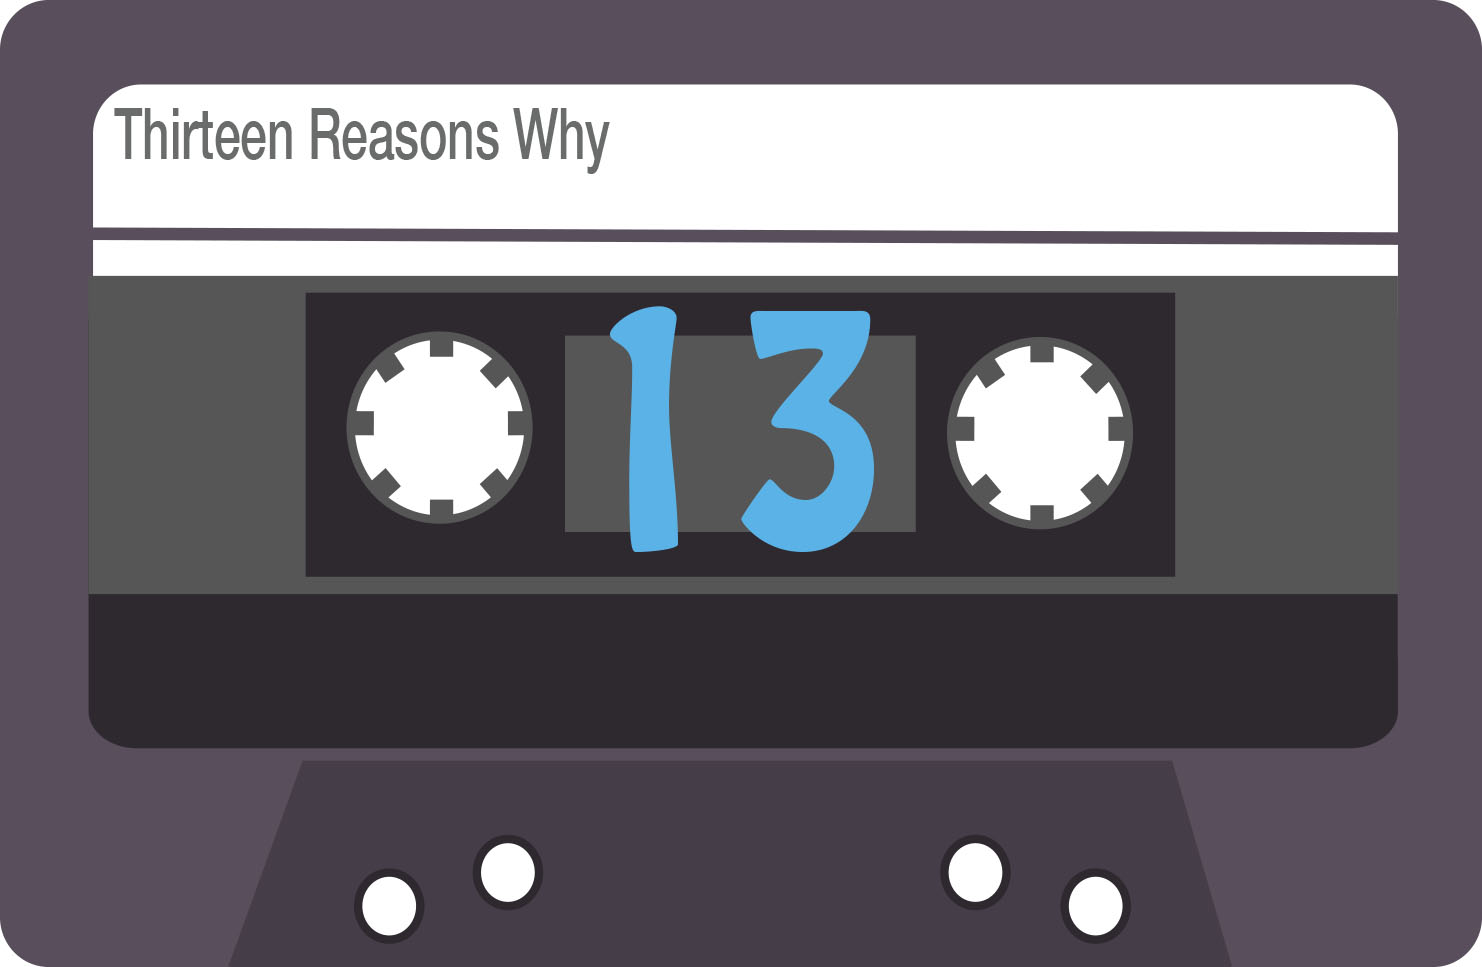 “13 Reasons Why” sets people in a panic. The Netflix series did a good job of showing that people should be nicer to each other, but at the same time it’s been criticized for causing unstable people to have suicidal thoughts.